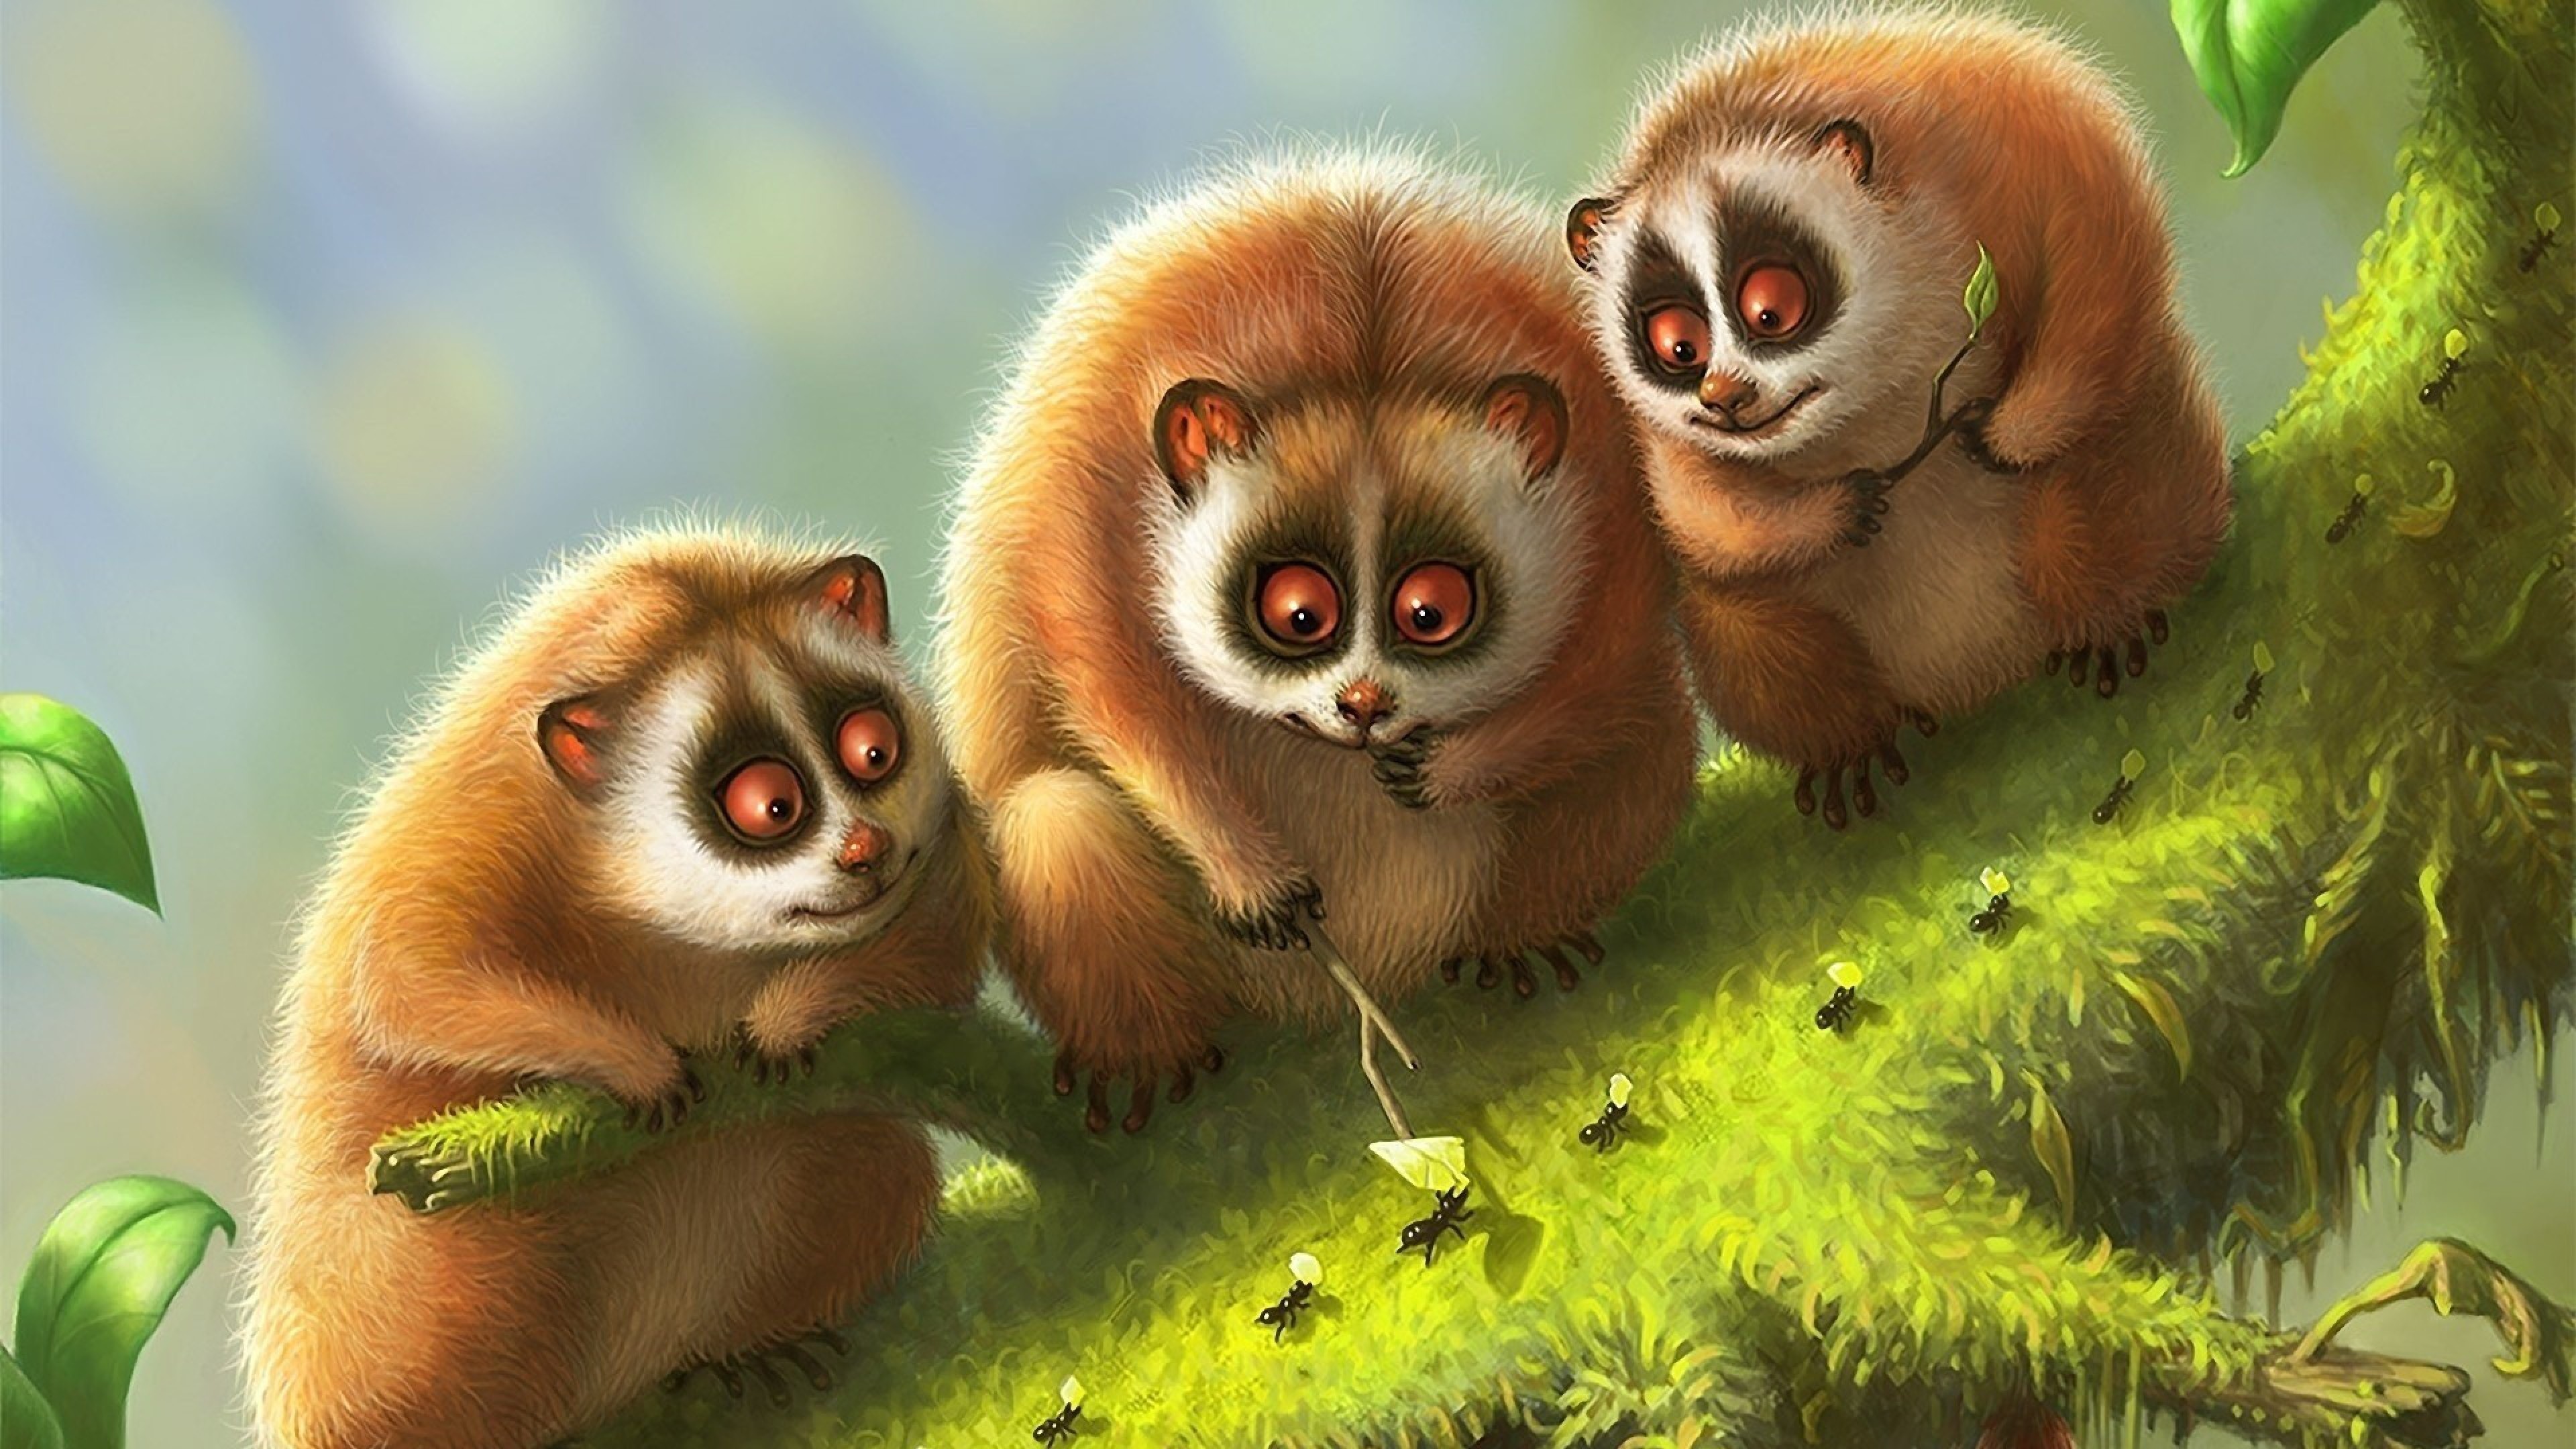 3840x2160 ... Lemur Wallpaper - Android Apps on Google Play ...